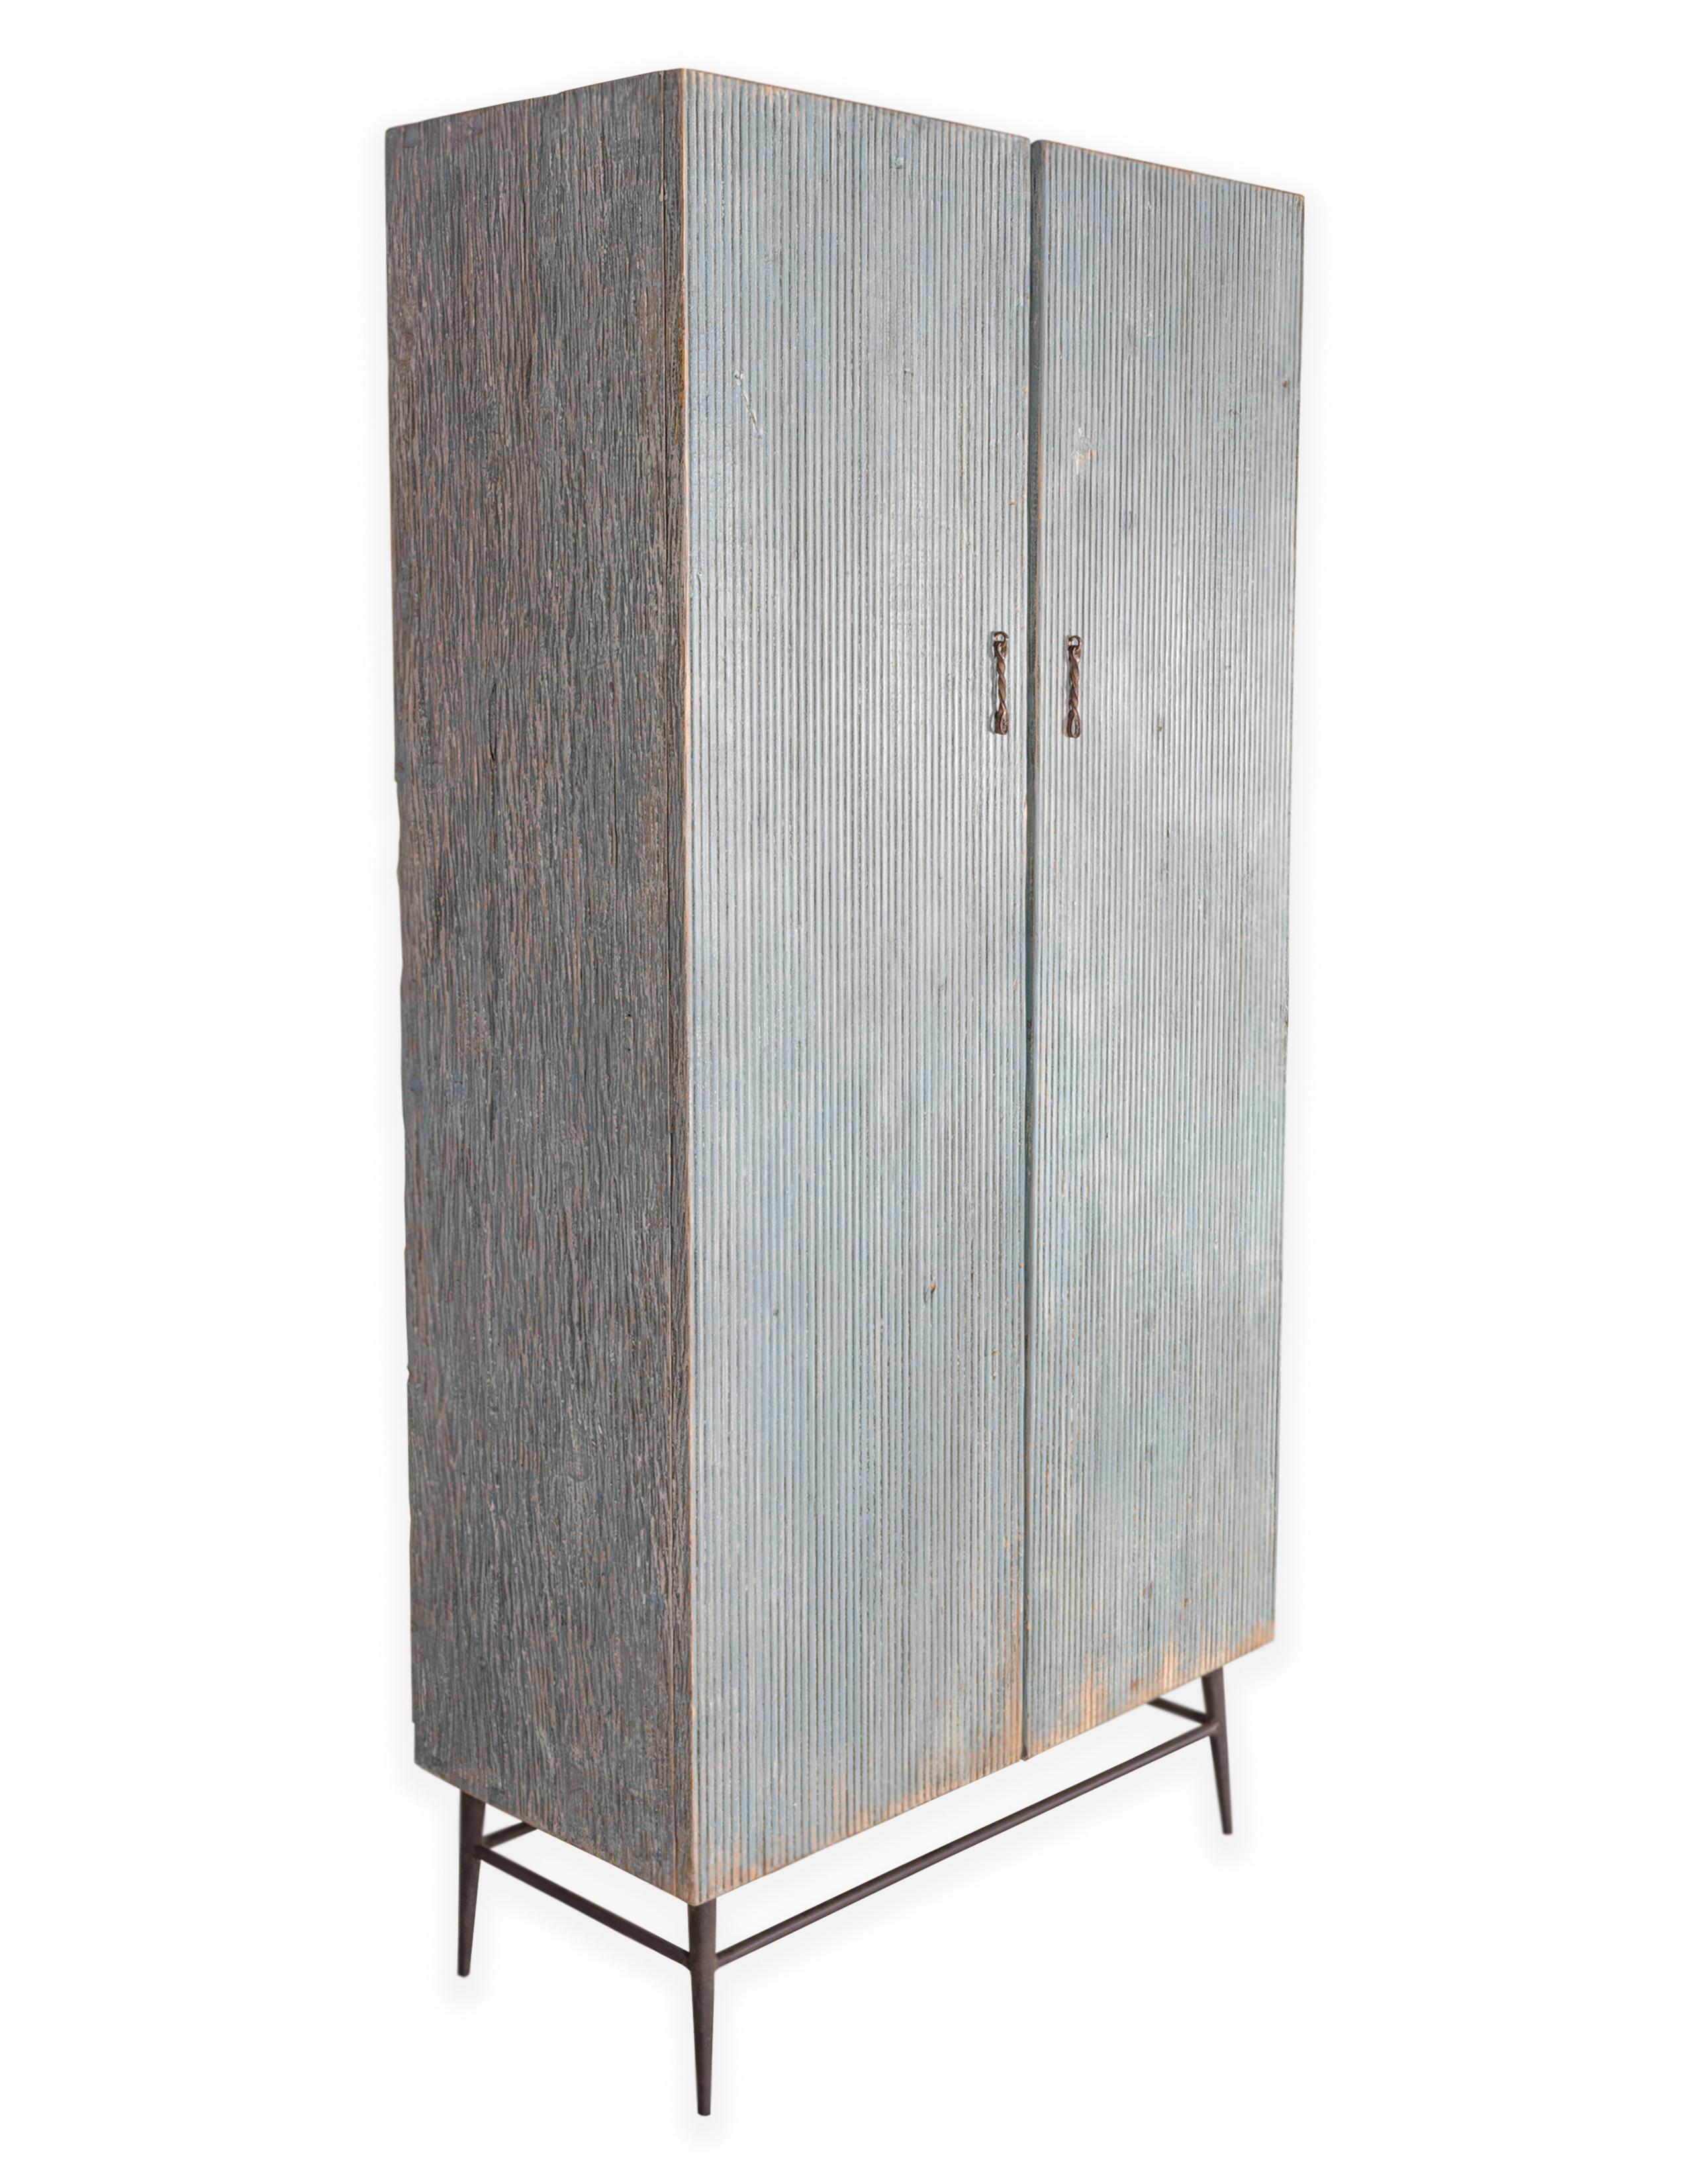 Distressed patina two door reeded wood cabinet.

In my organic, contemporary, vintage and mid-century modern aesthetic.

Piece from the Le Monde collection. Exclusive to Brendan Bass.
   